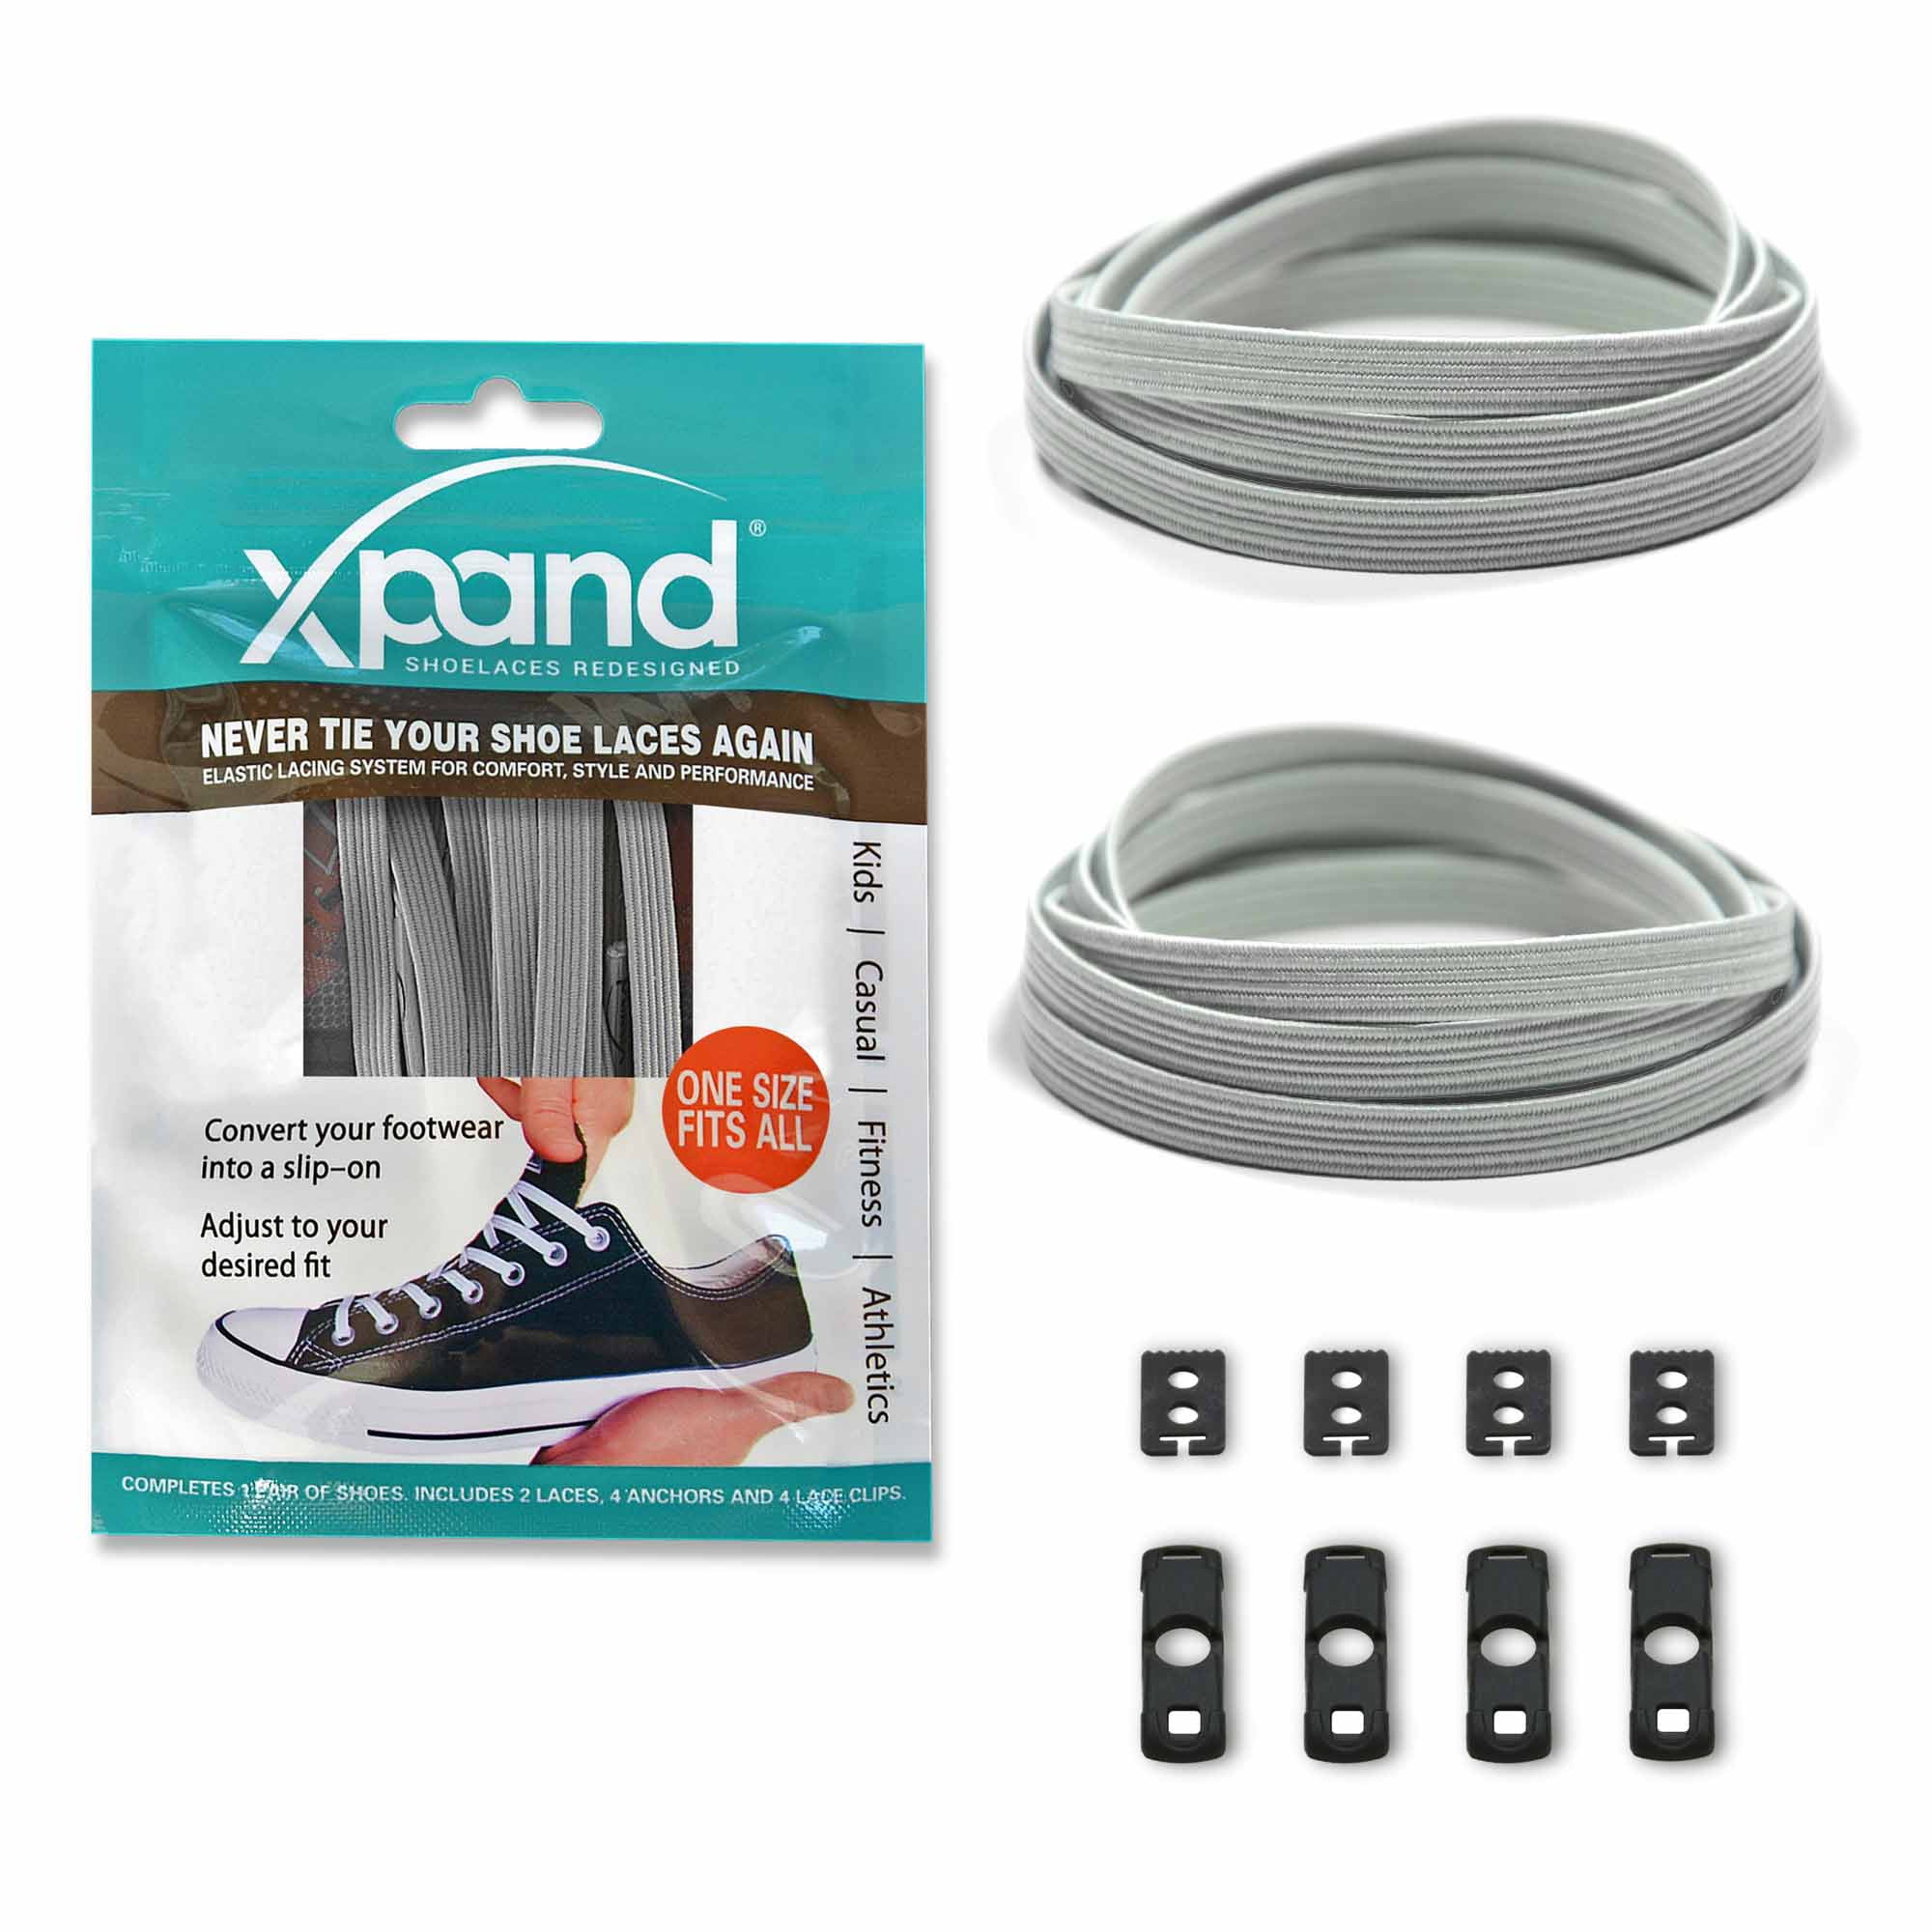 Xpand No Tie Shoelaces System with Elastic Laces One Size Fits All Adult and Kids Shoes